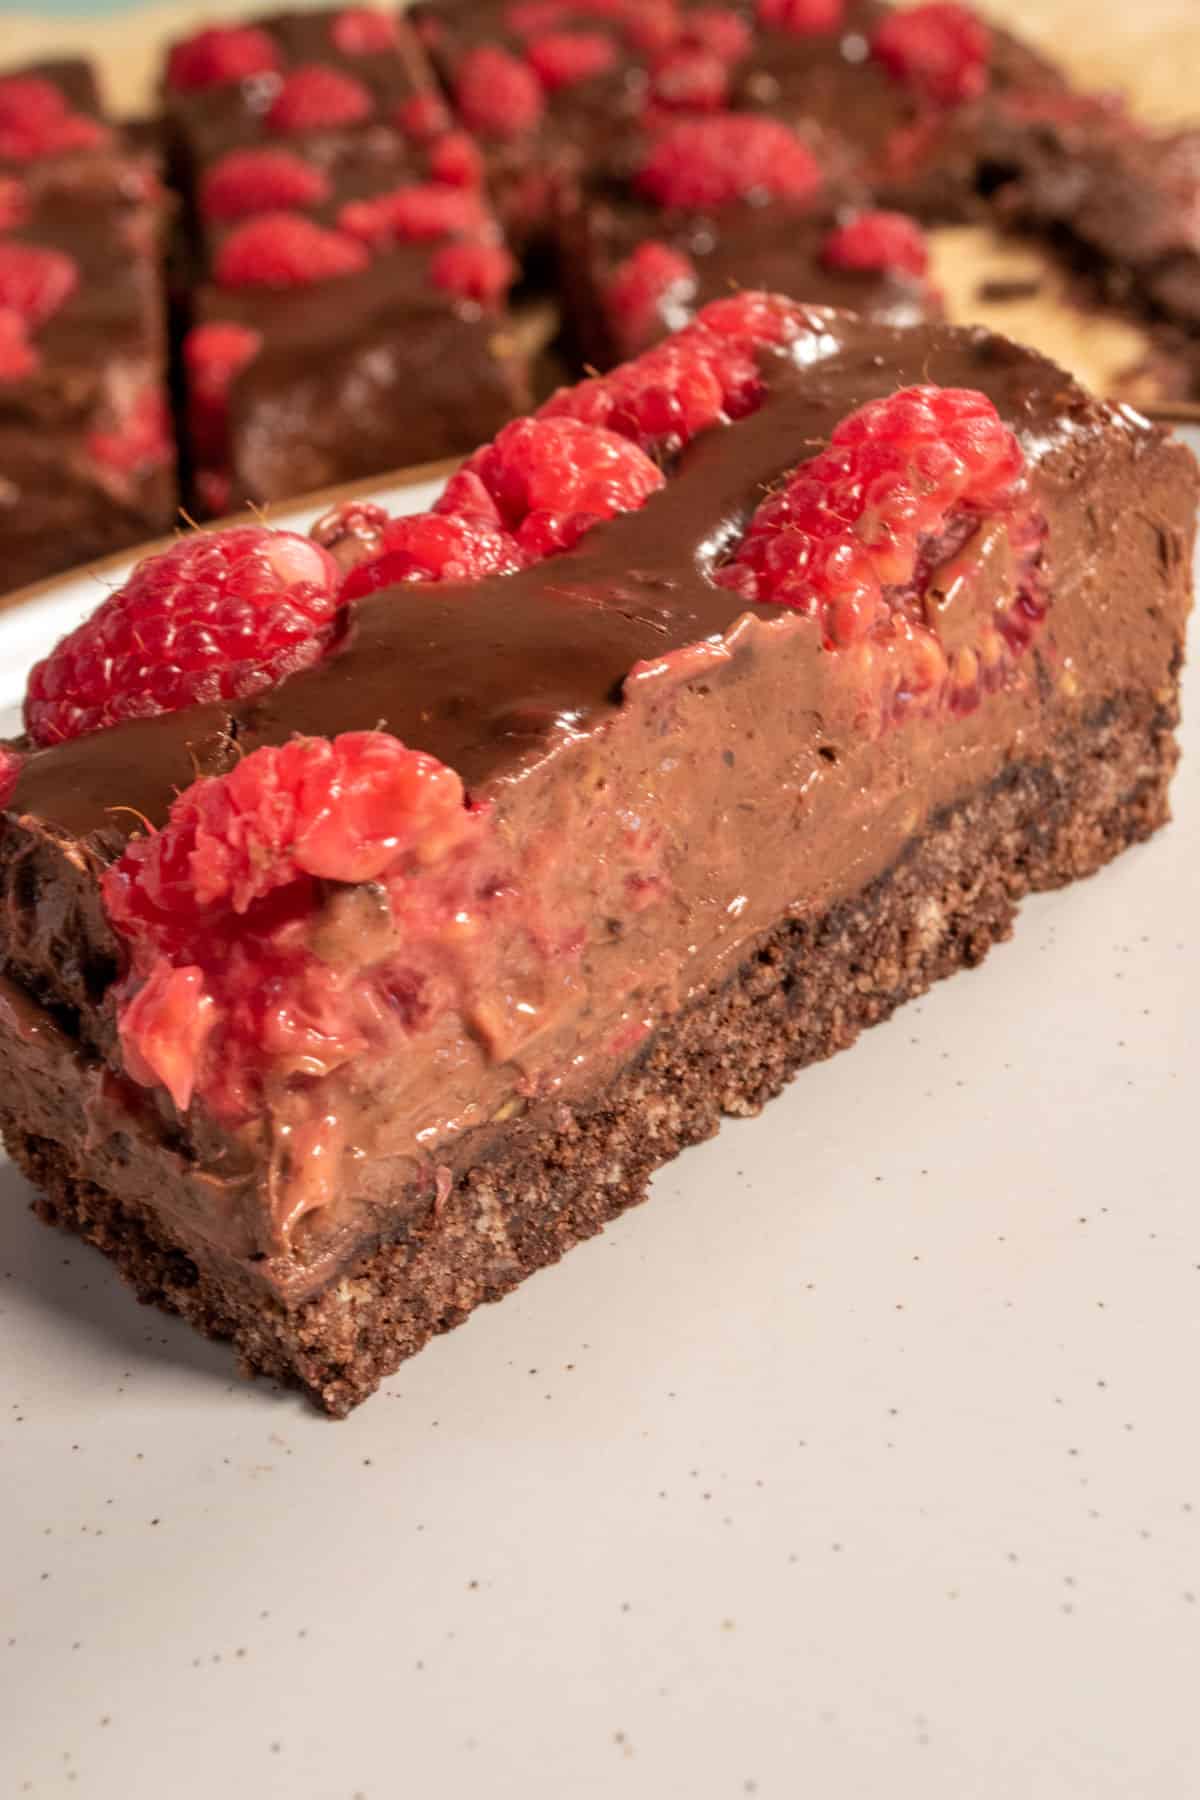 One of my chilled chocolate raspberry bars. There are raspberries inside as well as on top. Many other bars are sitting in the background. 